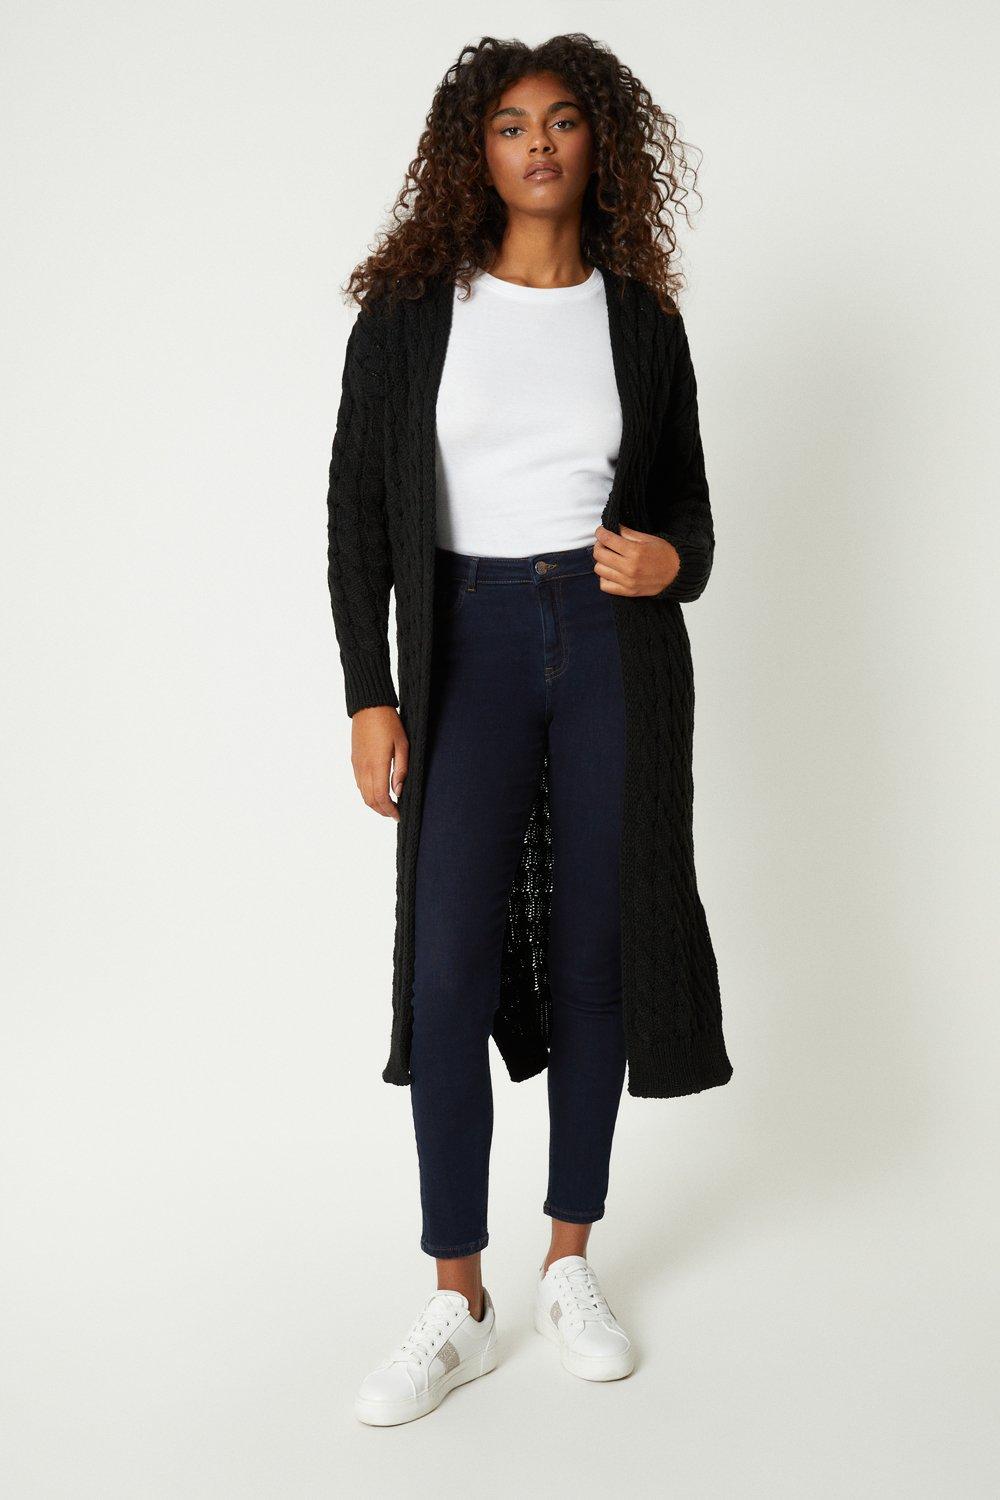 Women’s Cable Knit Maxi Cardigan - black - S